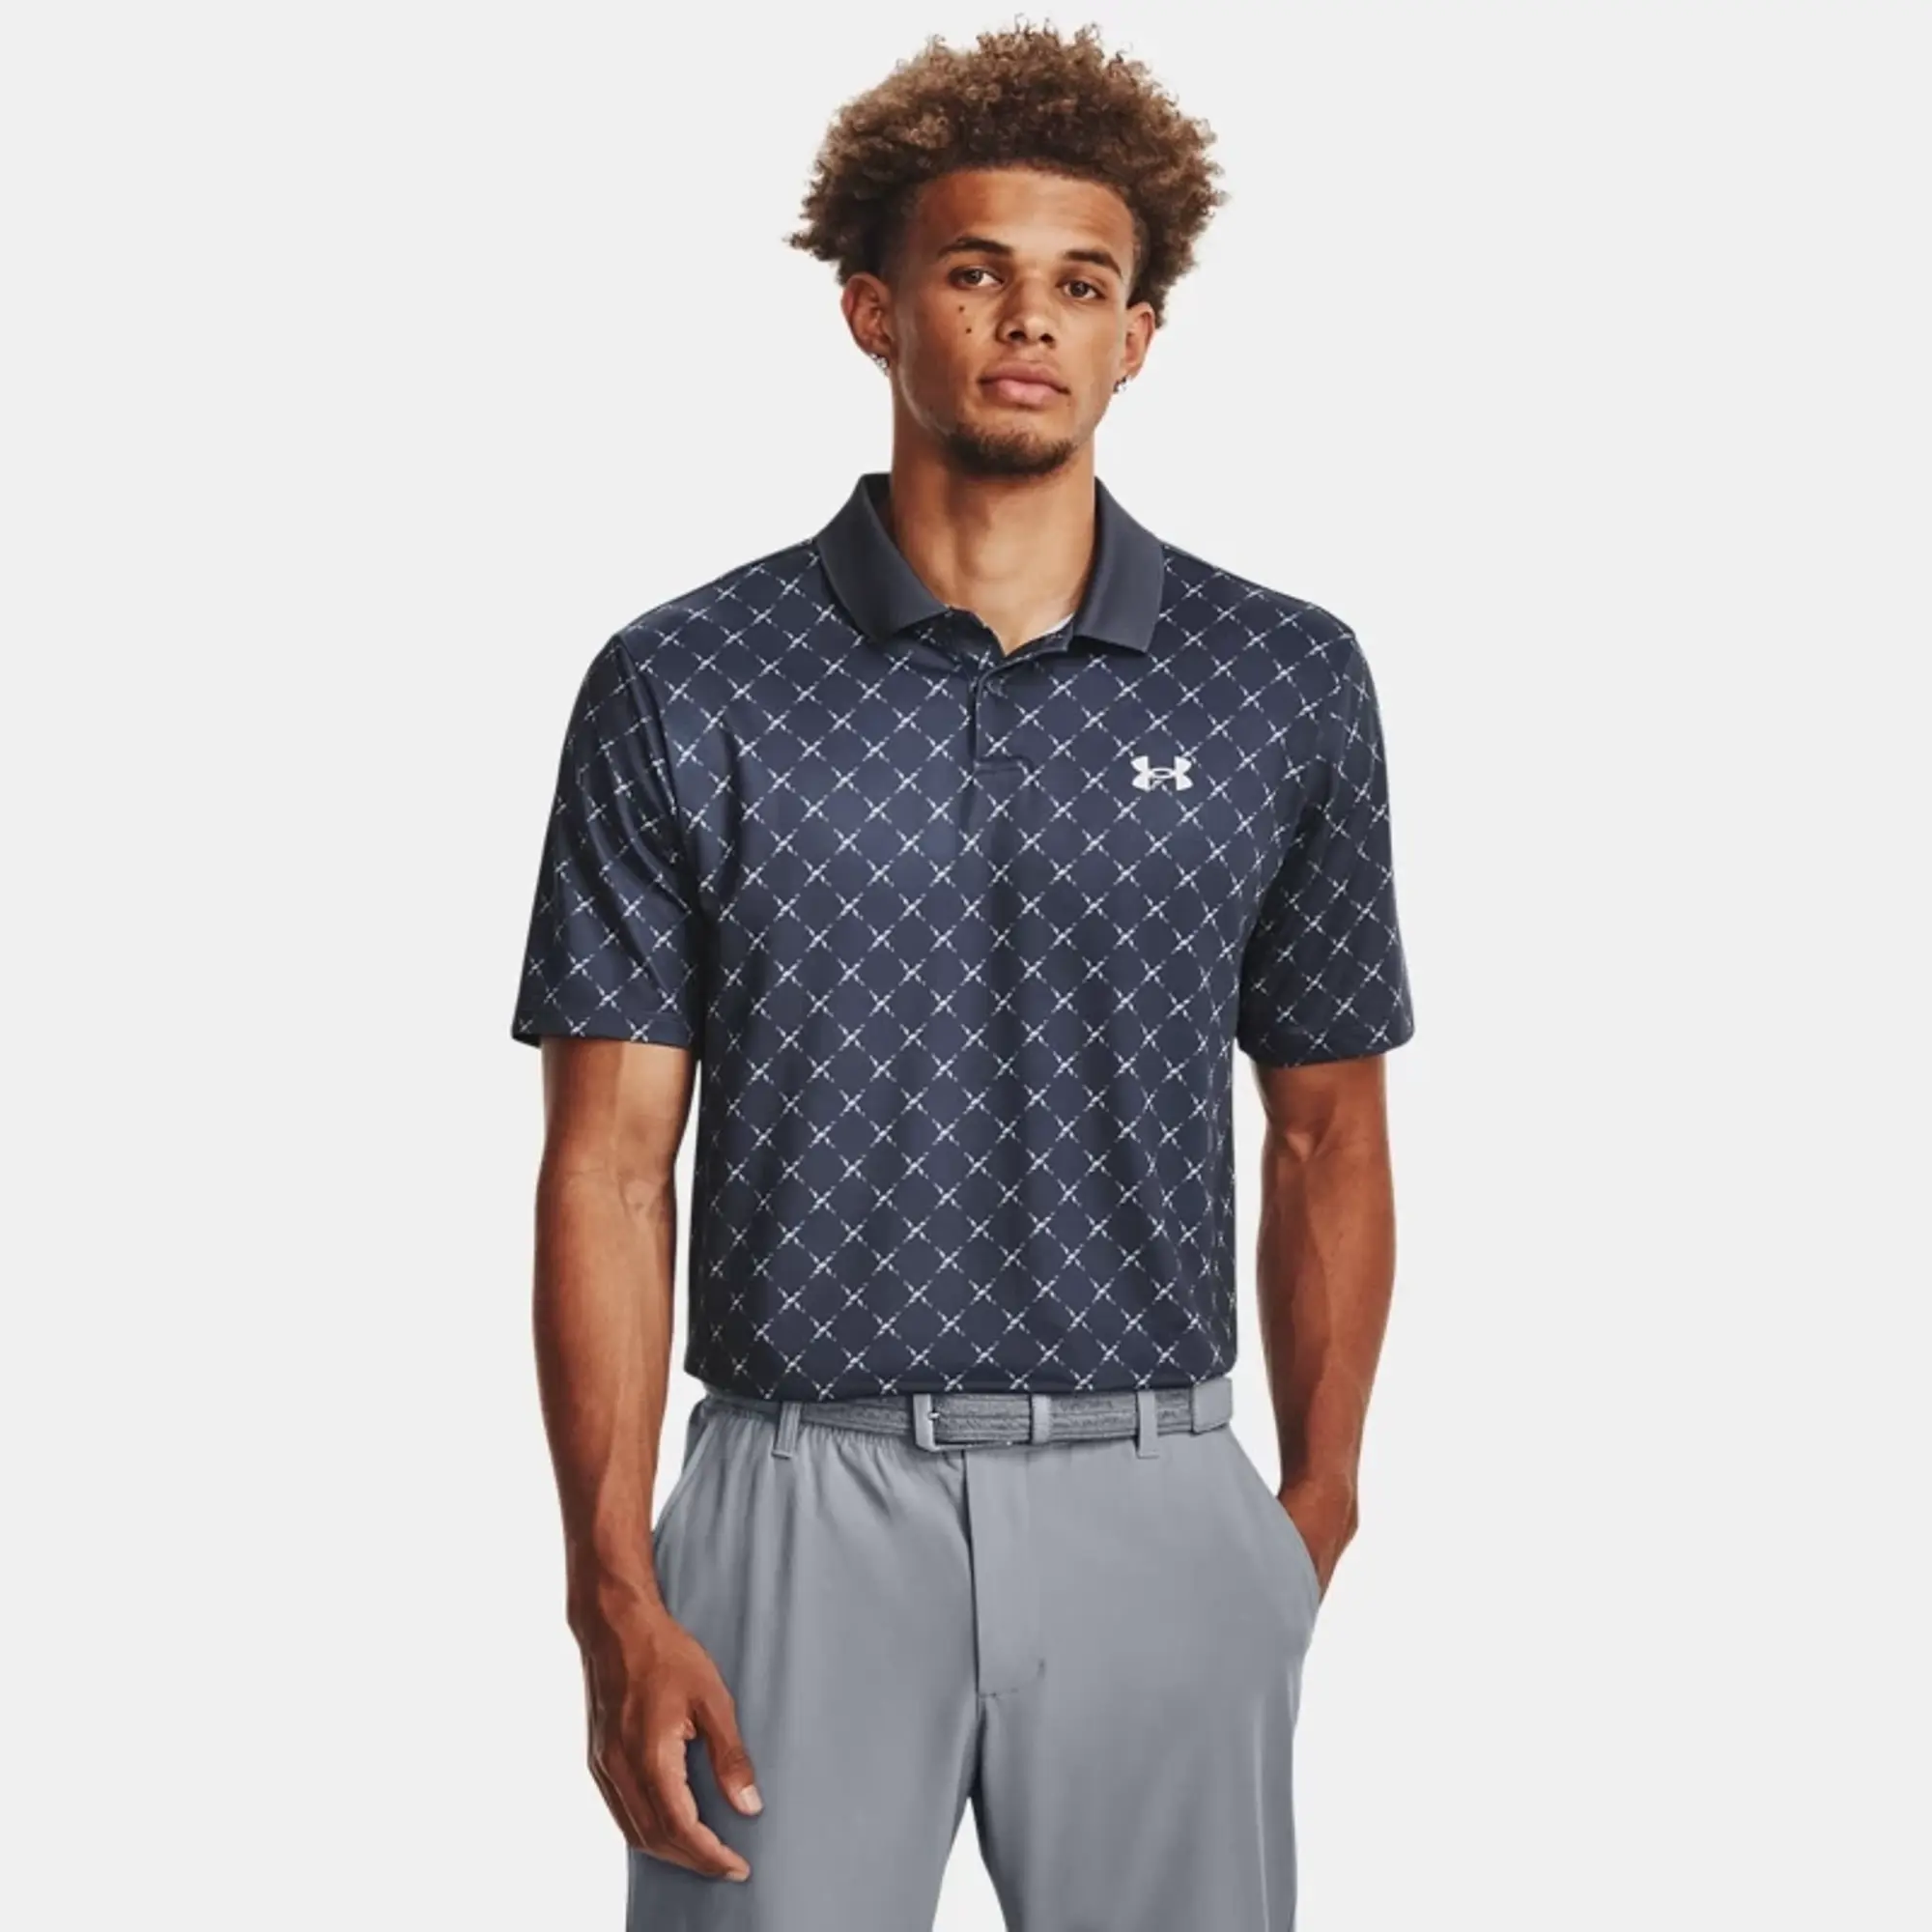 Under Armour Perf Printed Polo Sn34 - Grey